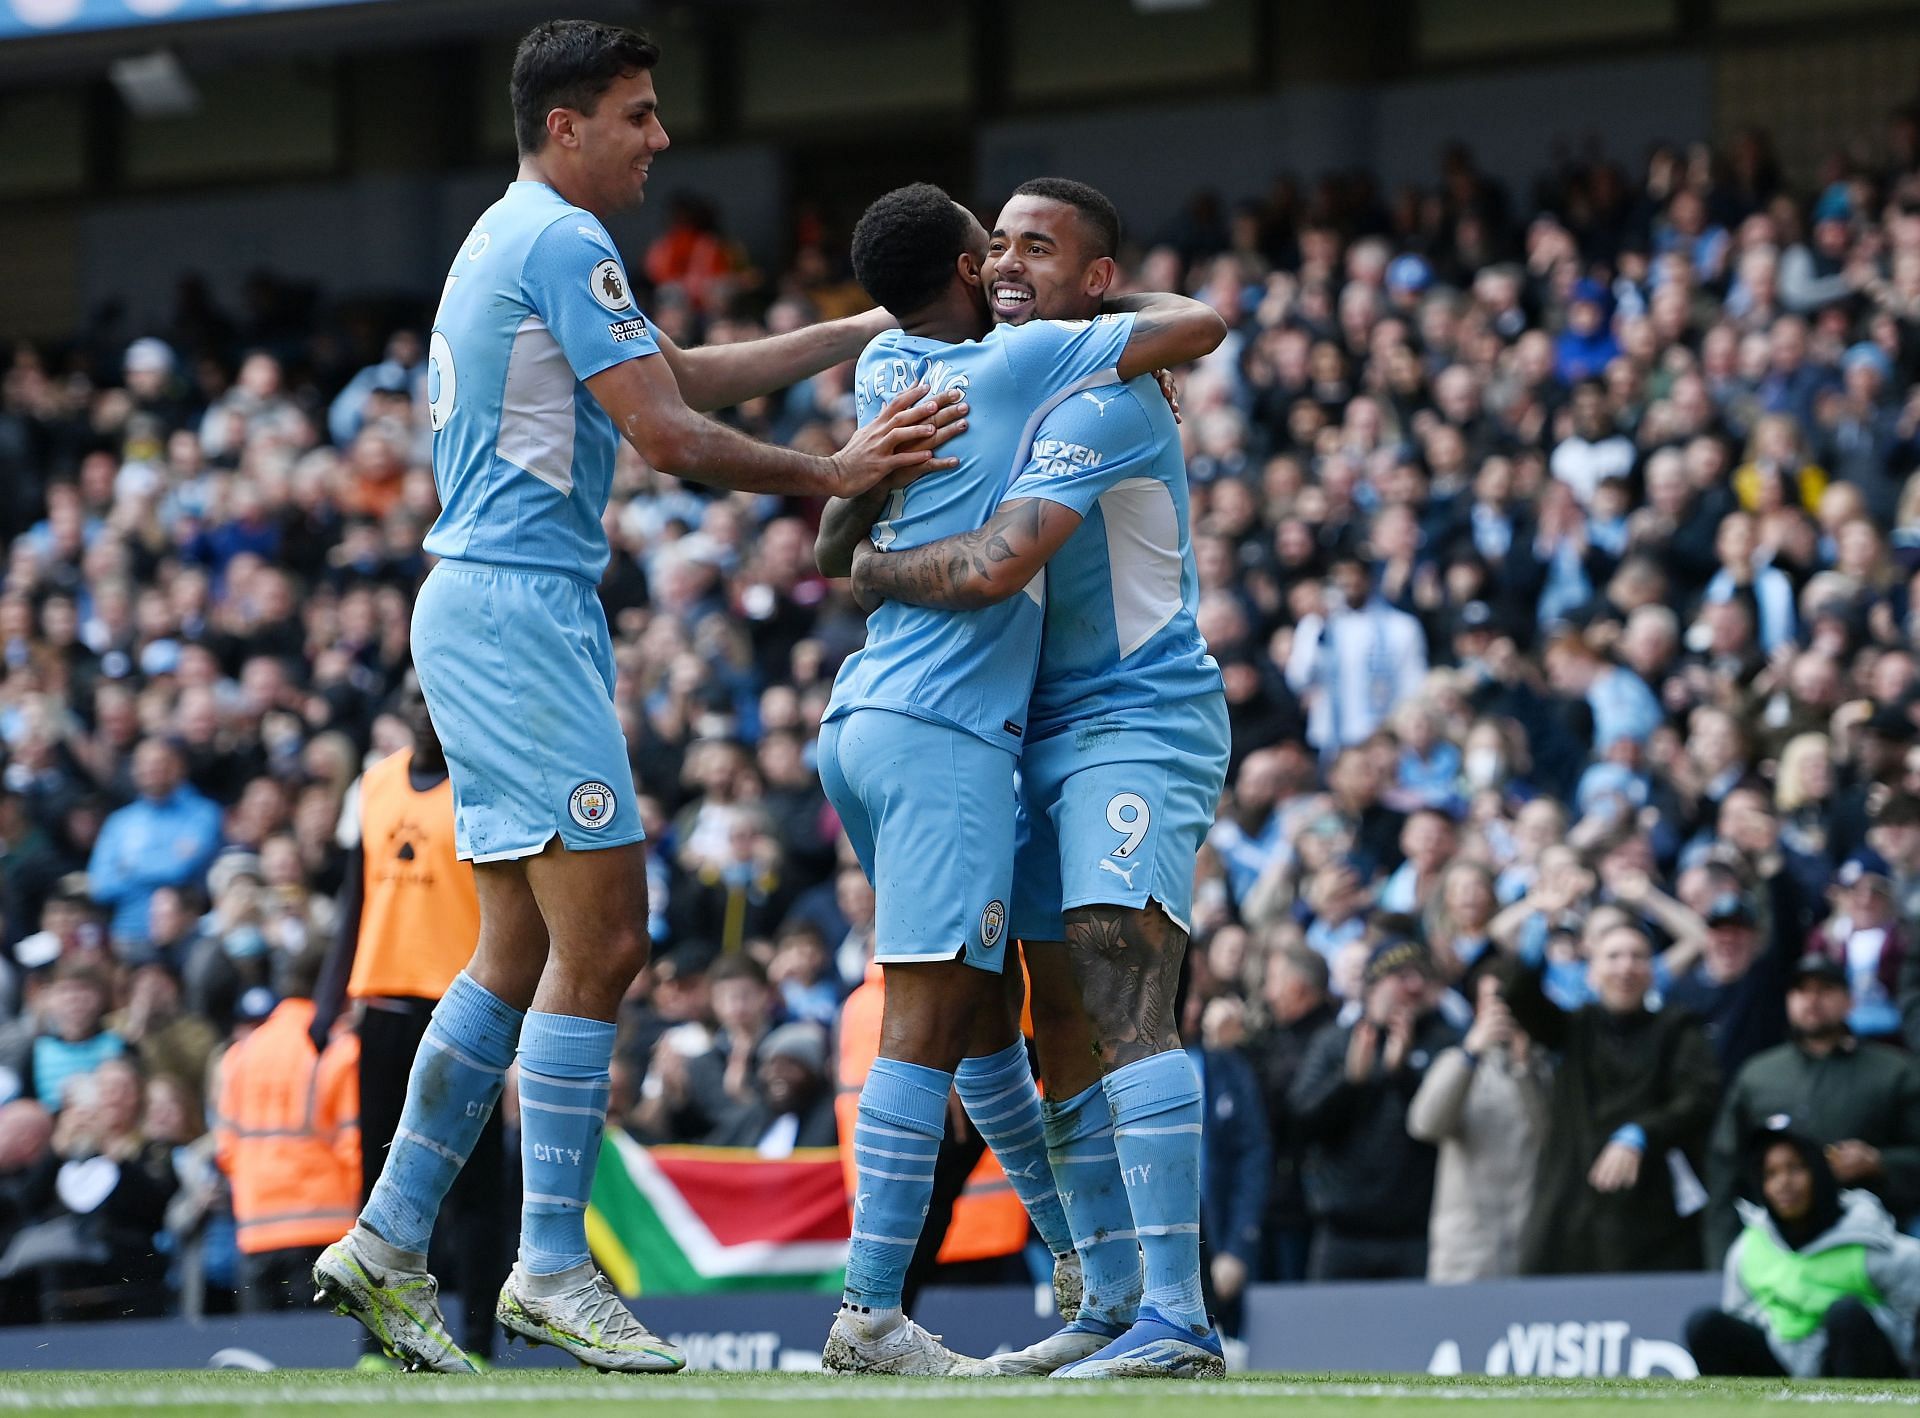 Manchester City were terrific against Newcastle United on Sunday afternoon